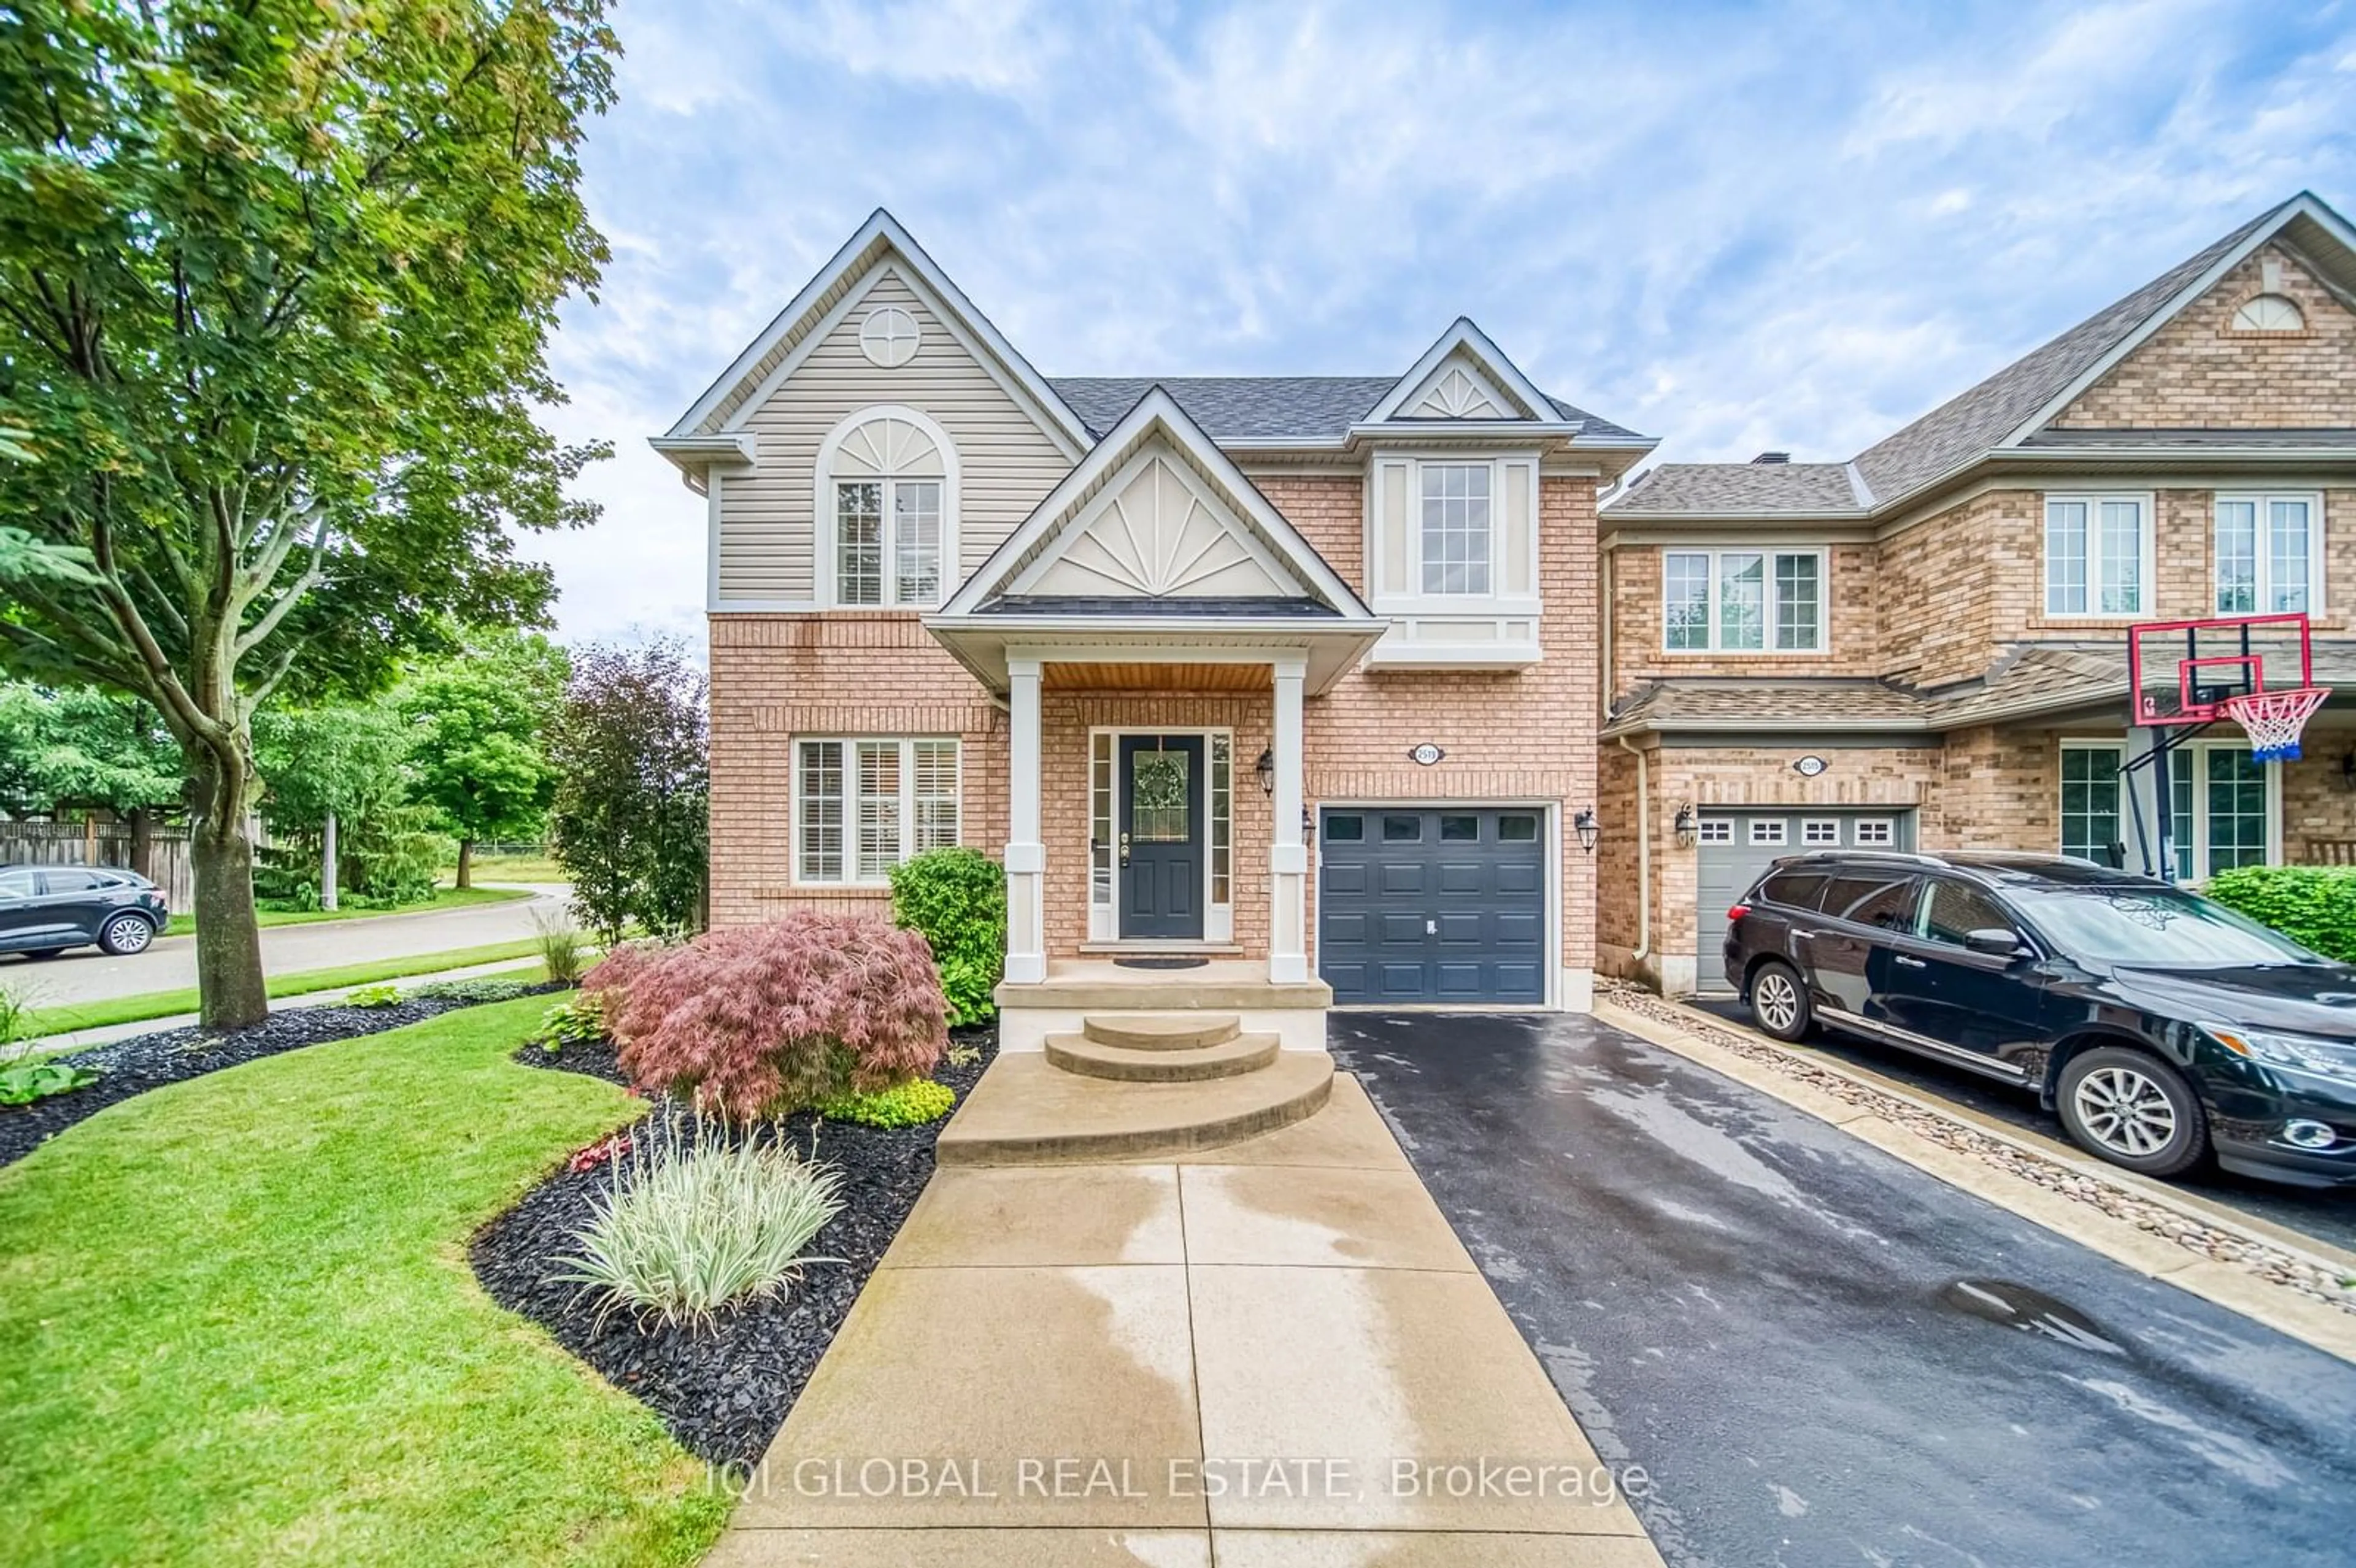 Home with brick exterior material for 2519 Dashwood Dr, Oakville Ontario L6M 4C1